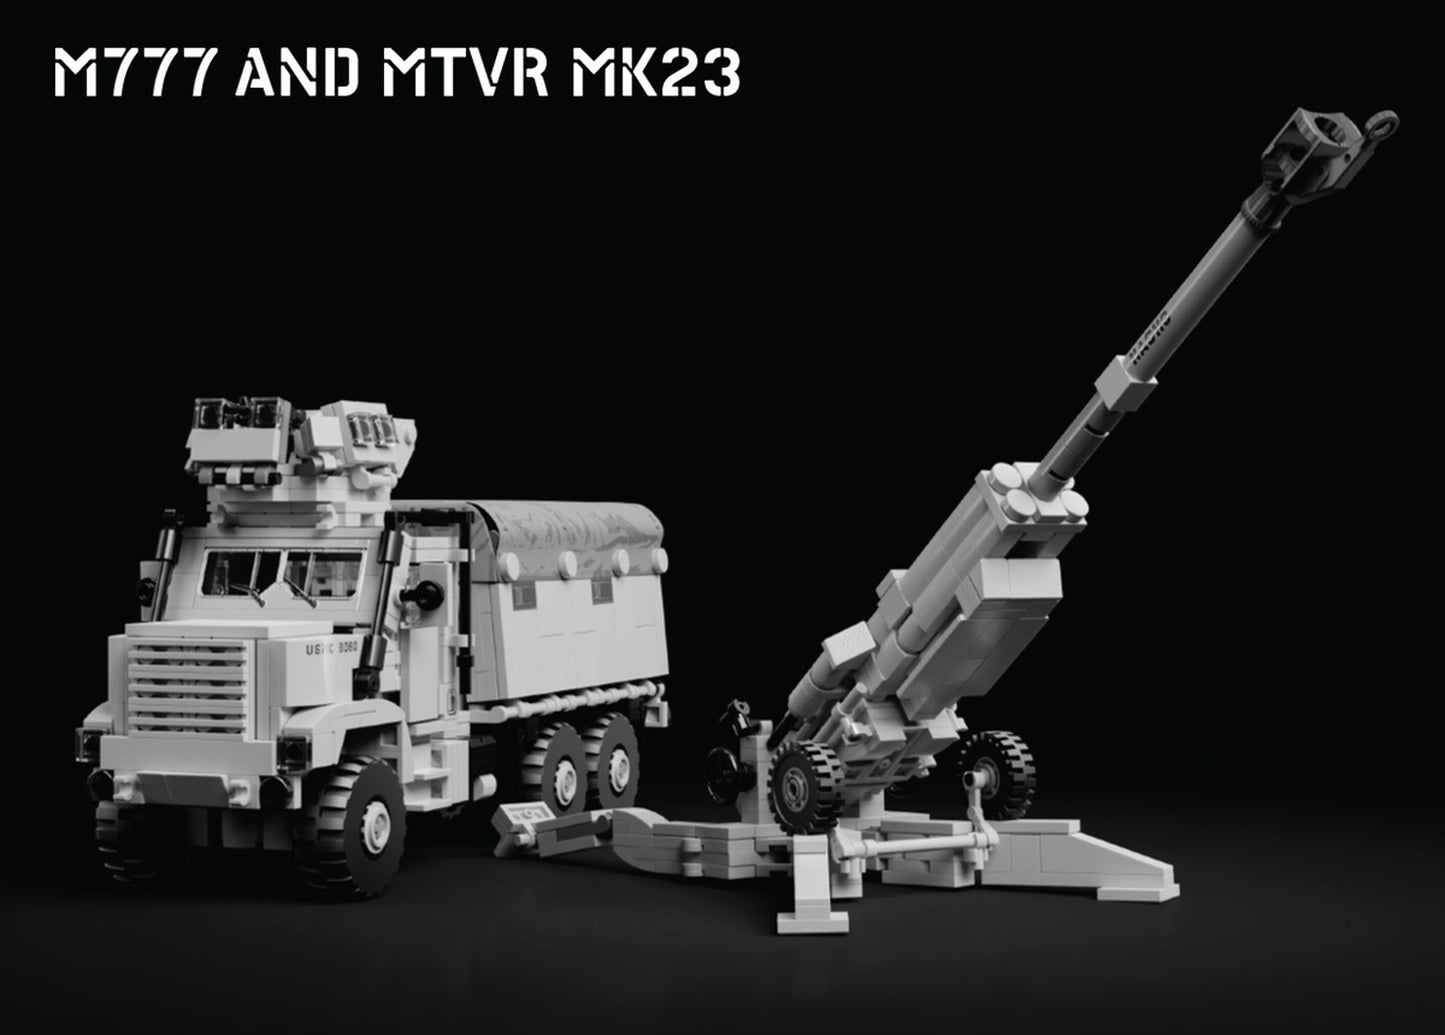 M777 and MTVR MK23 – 155mm Howitzer and Cargo Truck